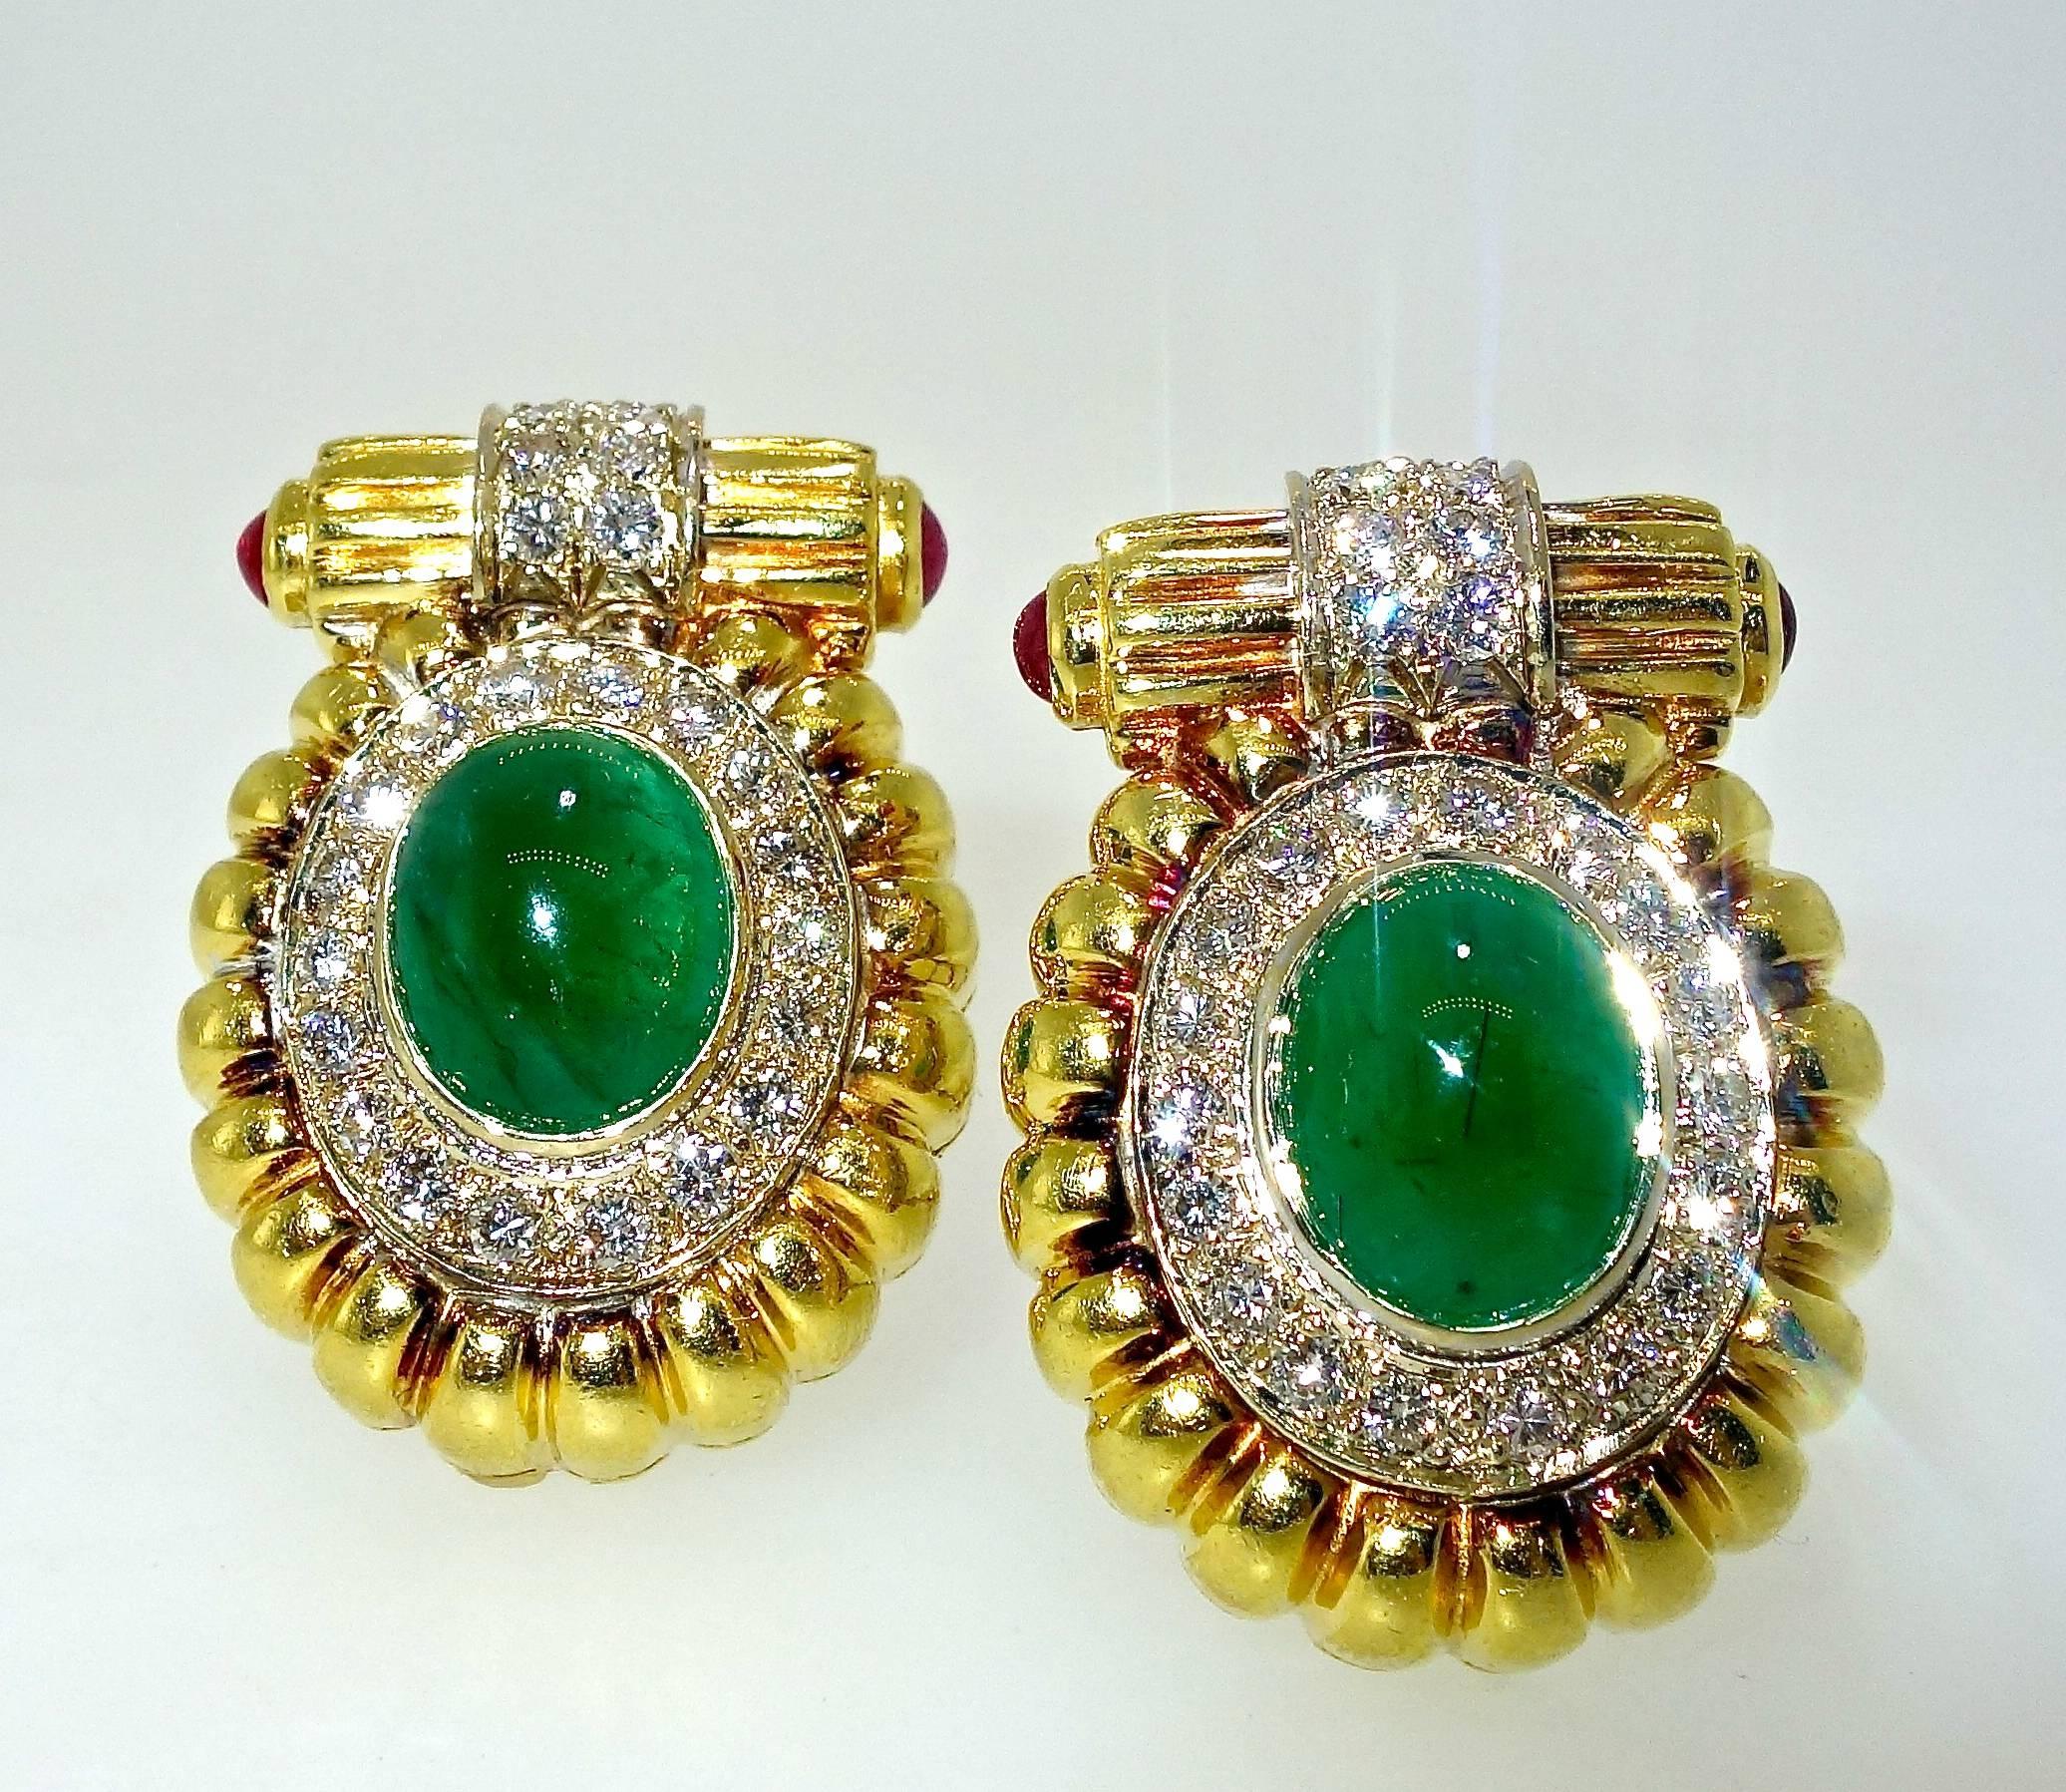 The 2 well matched cabachon emeralds are a deep green.  They weigh a total of approximately 7 cts.  Surrounding these center stones are 36 diamonds all well matched, brilliant cut stones, weighing a total of approximately 1.44 cts.  The diamonds are